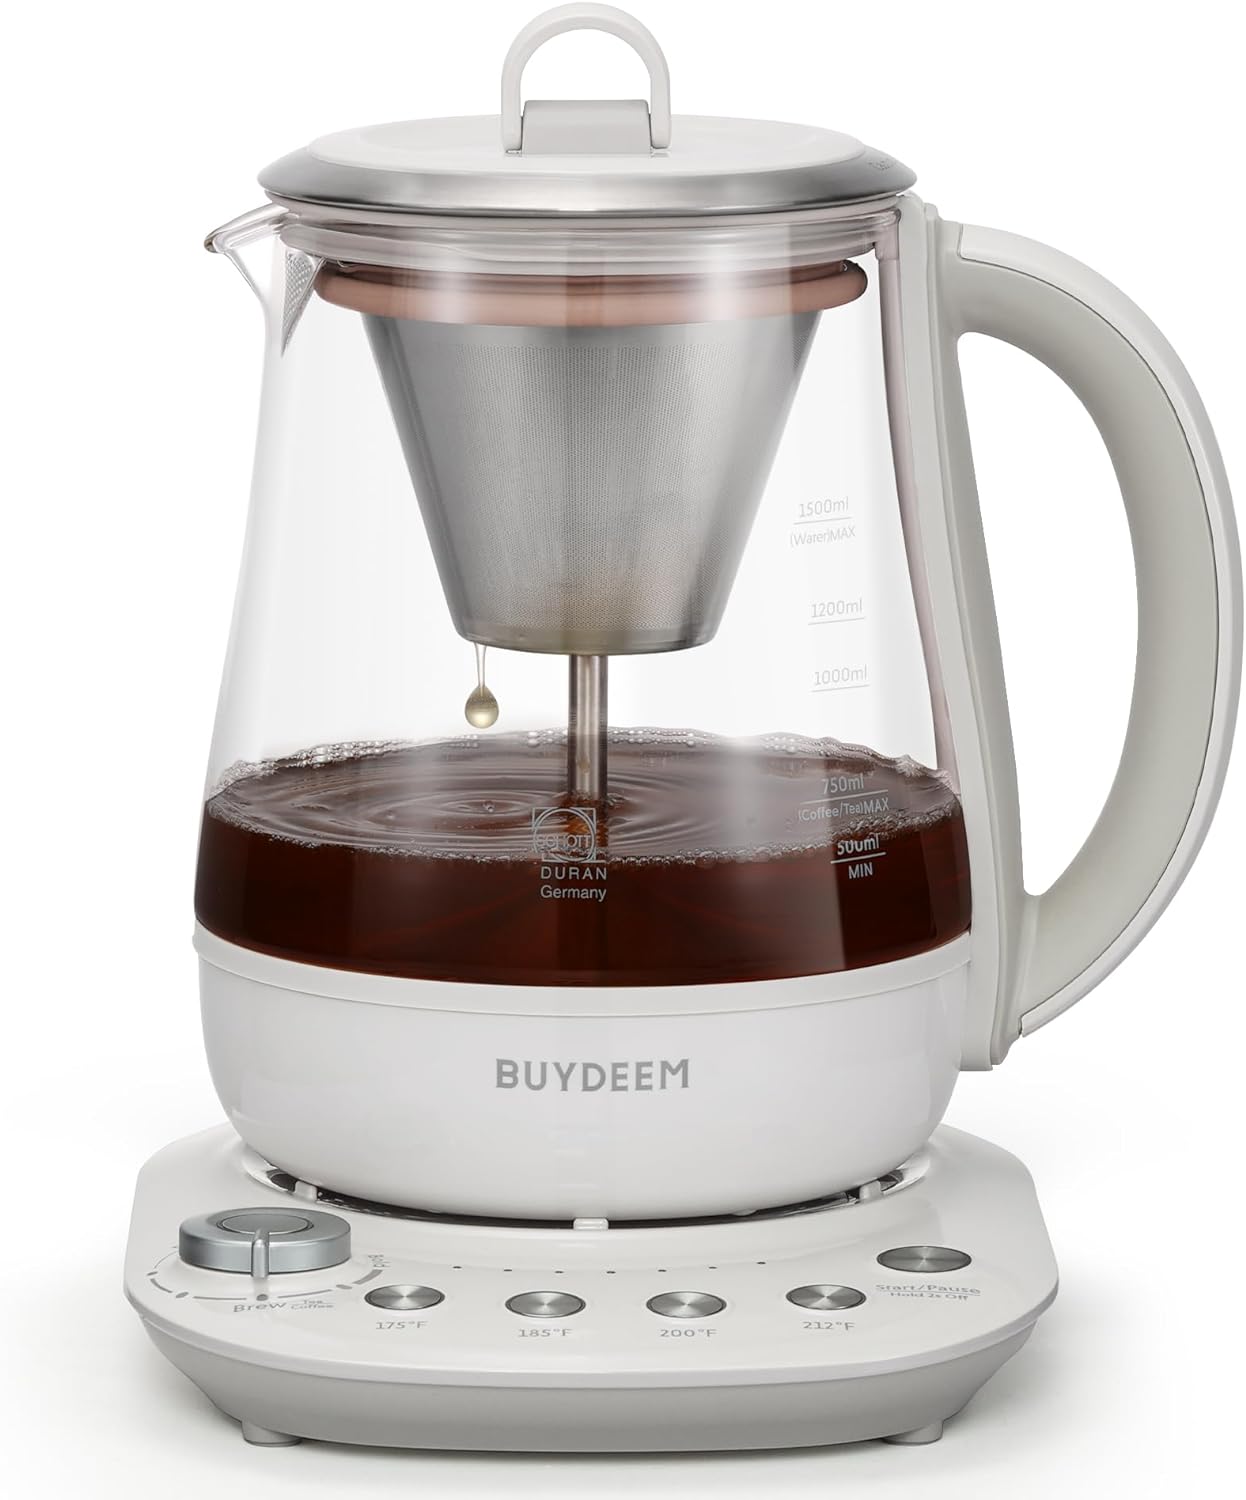 BUYDEEM K156 Tea Maker, Electric Kettle for Coffee and Tea Brewer with 6 Flavor Controls, 4 Temperature Settings, 8 Hours Keep Warm, 1.5L